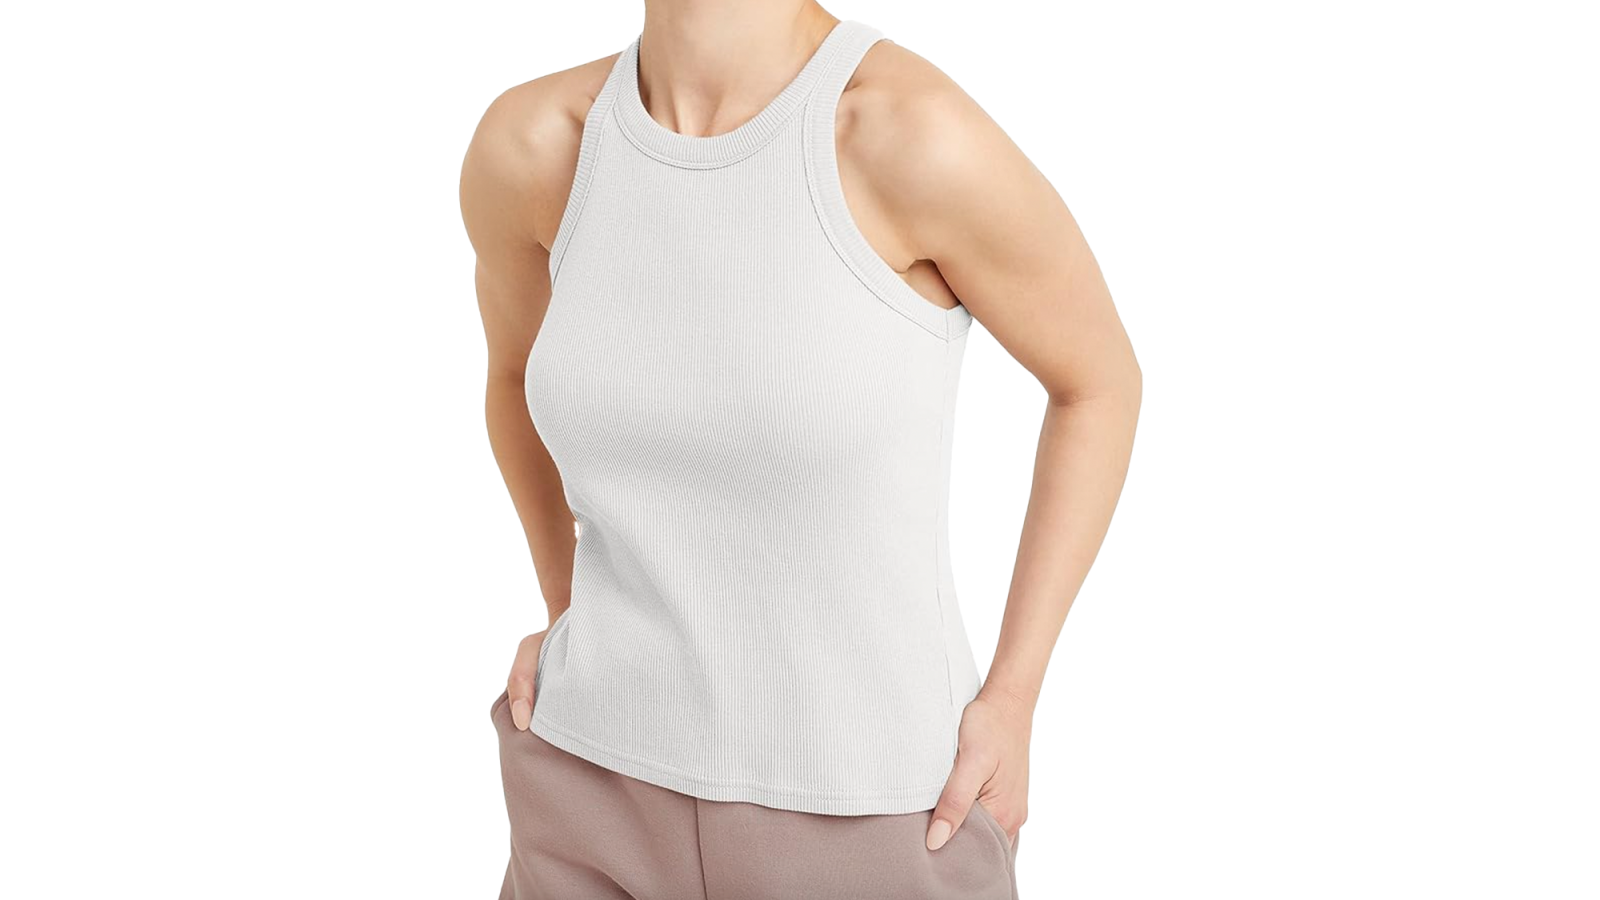 This 'Comfy' Hanes Racerback Tank Top Is 30% Off at